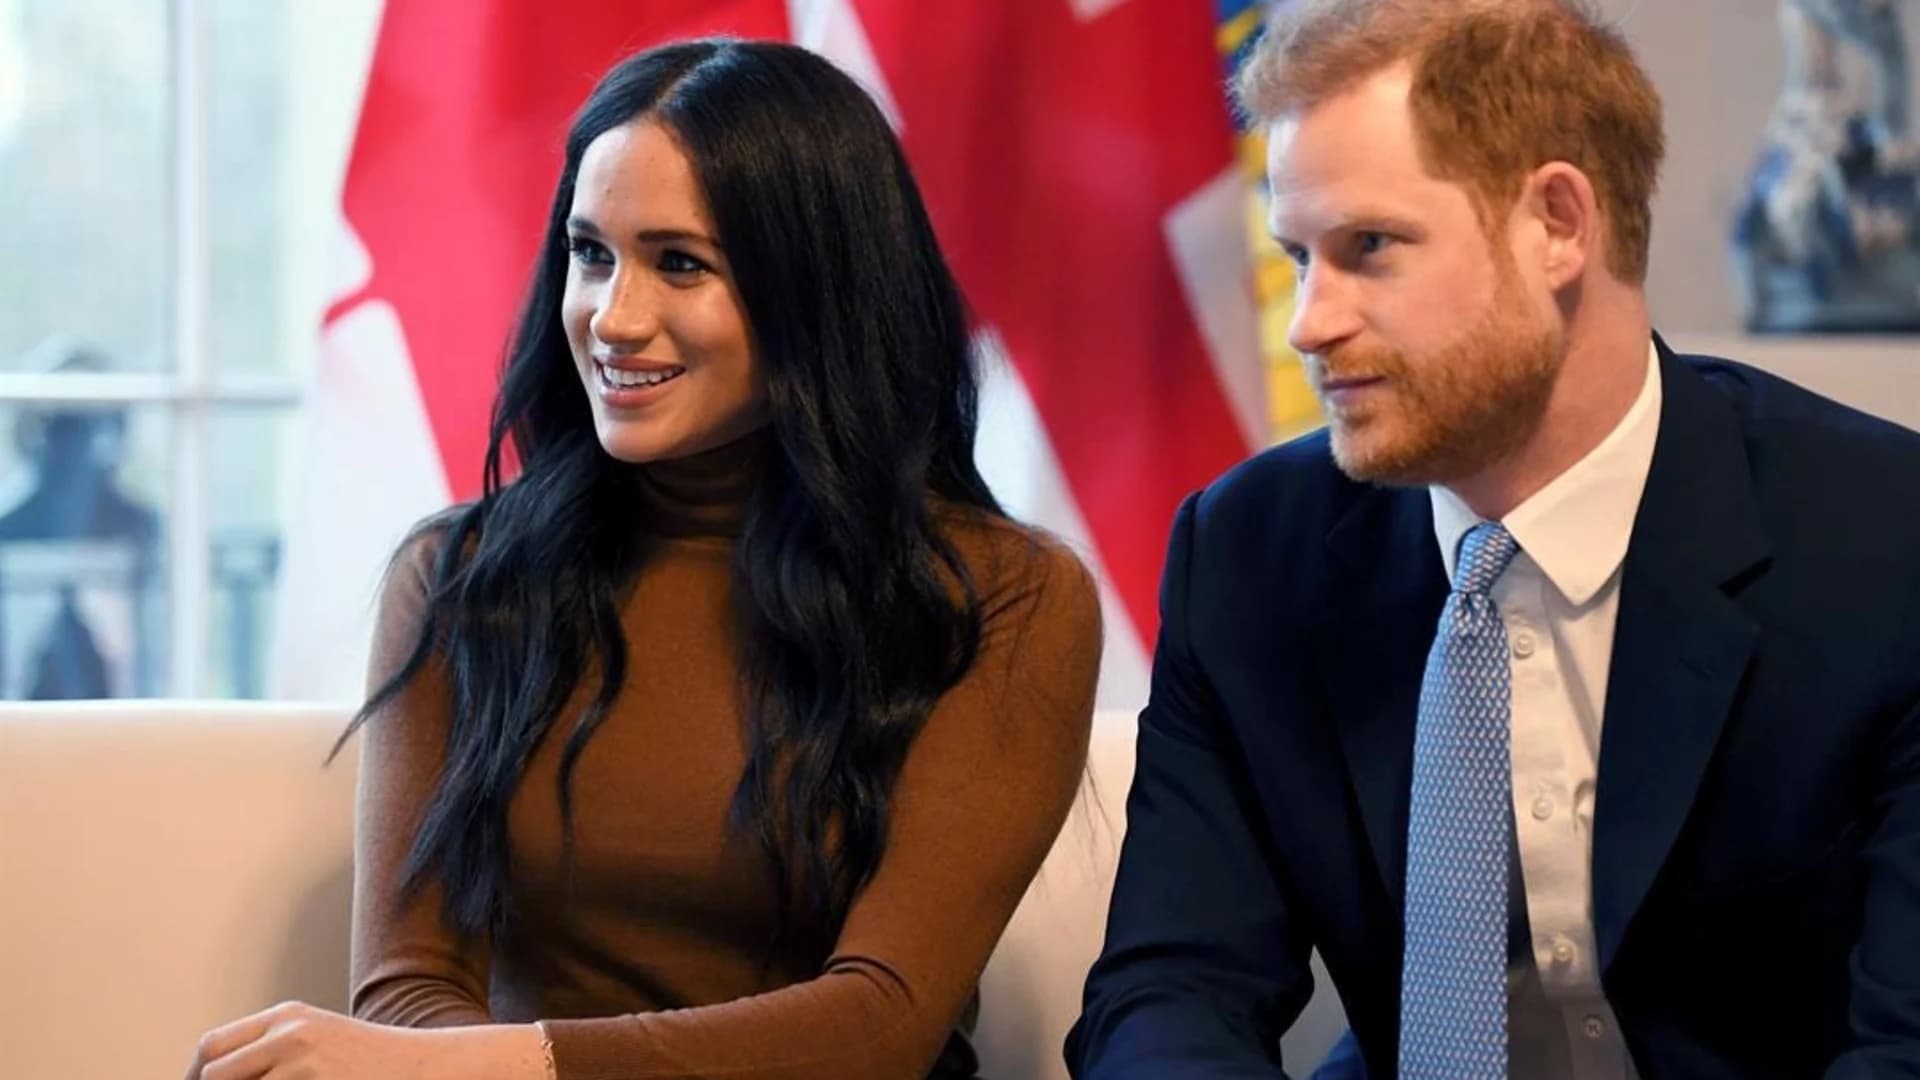 Prince Harry and Meghan to 'step back' as senior UK royals